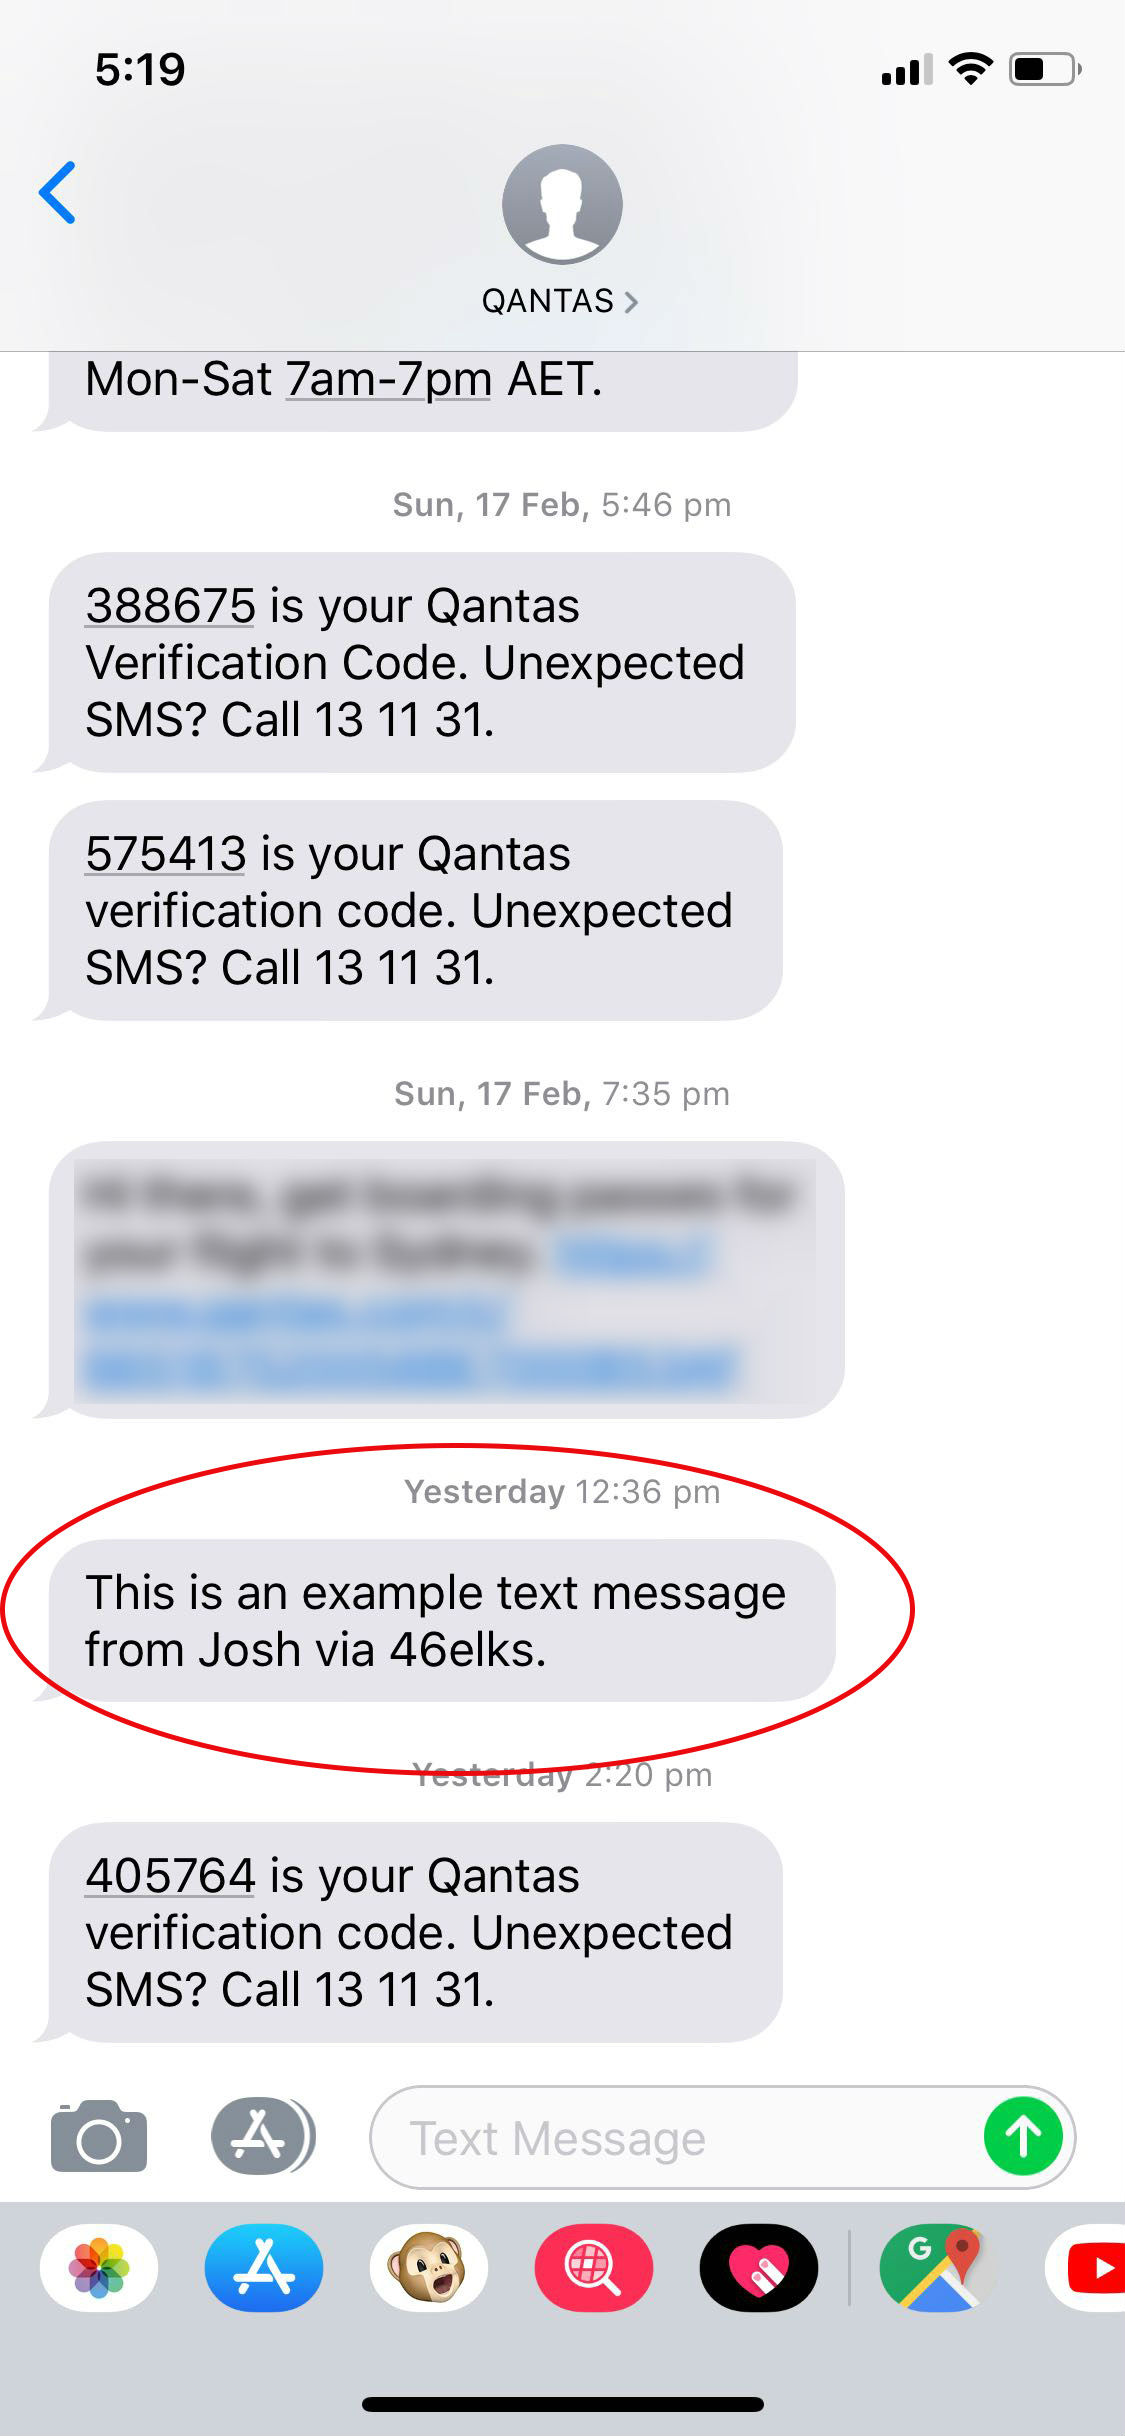 A text message thread from QANTAS, including a fake message.